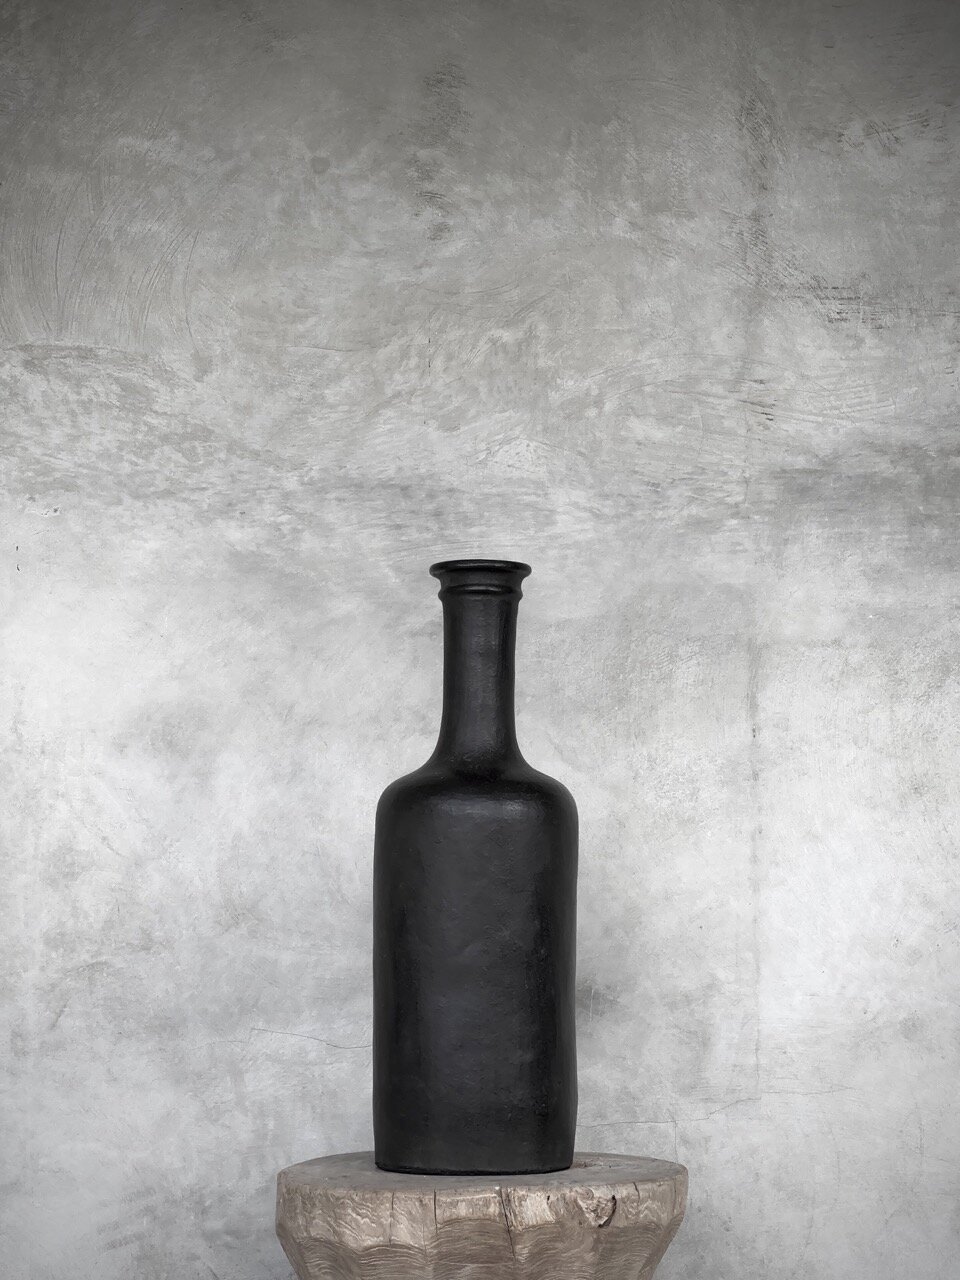 BOTOL small clay bottle, antique black